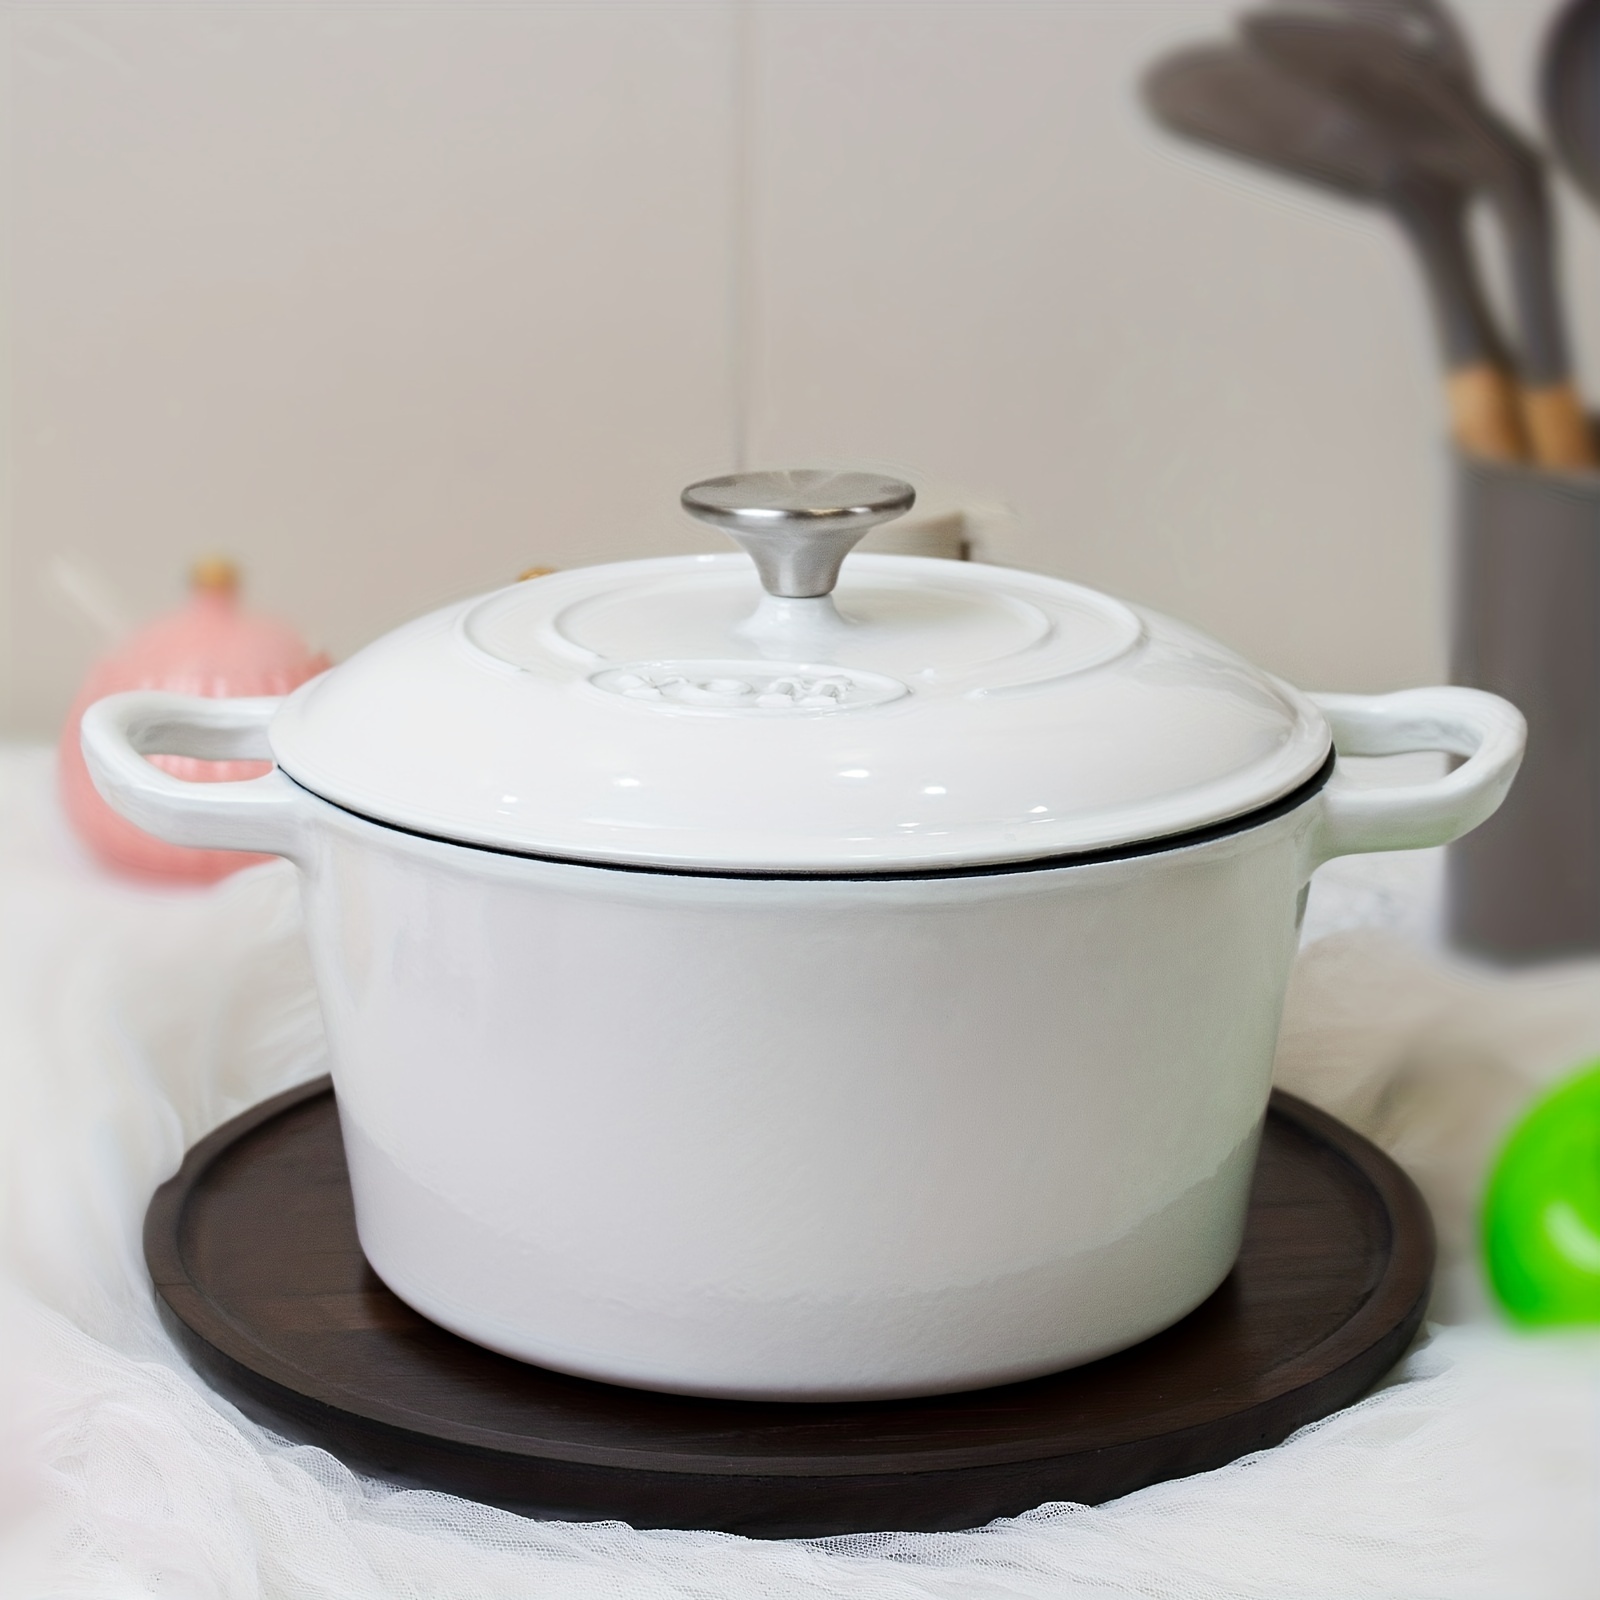 1pc, Enameled Cast Iron Dutch Oven With Lid (5.71''), Small Enamel Pot With